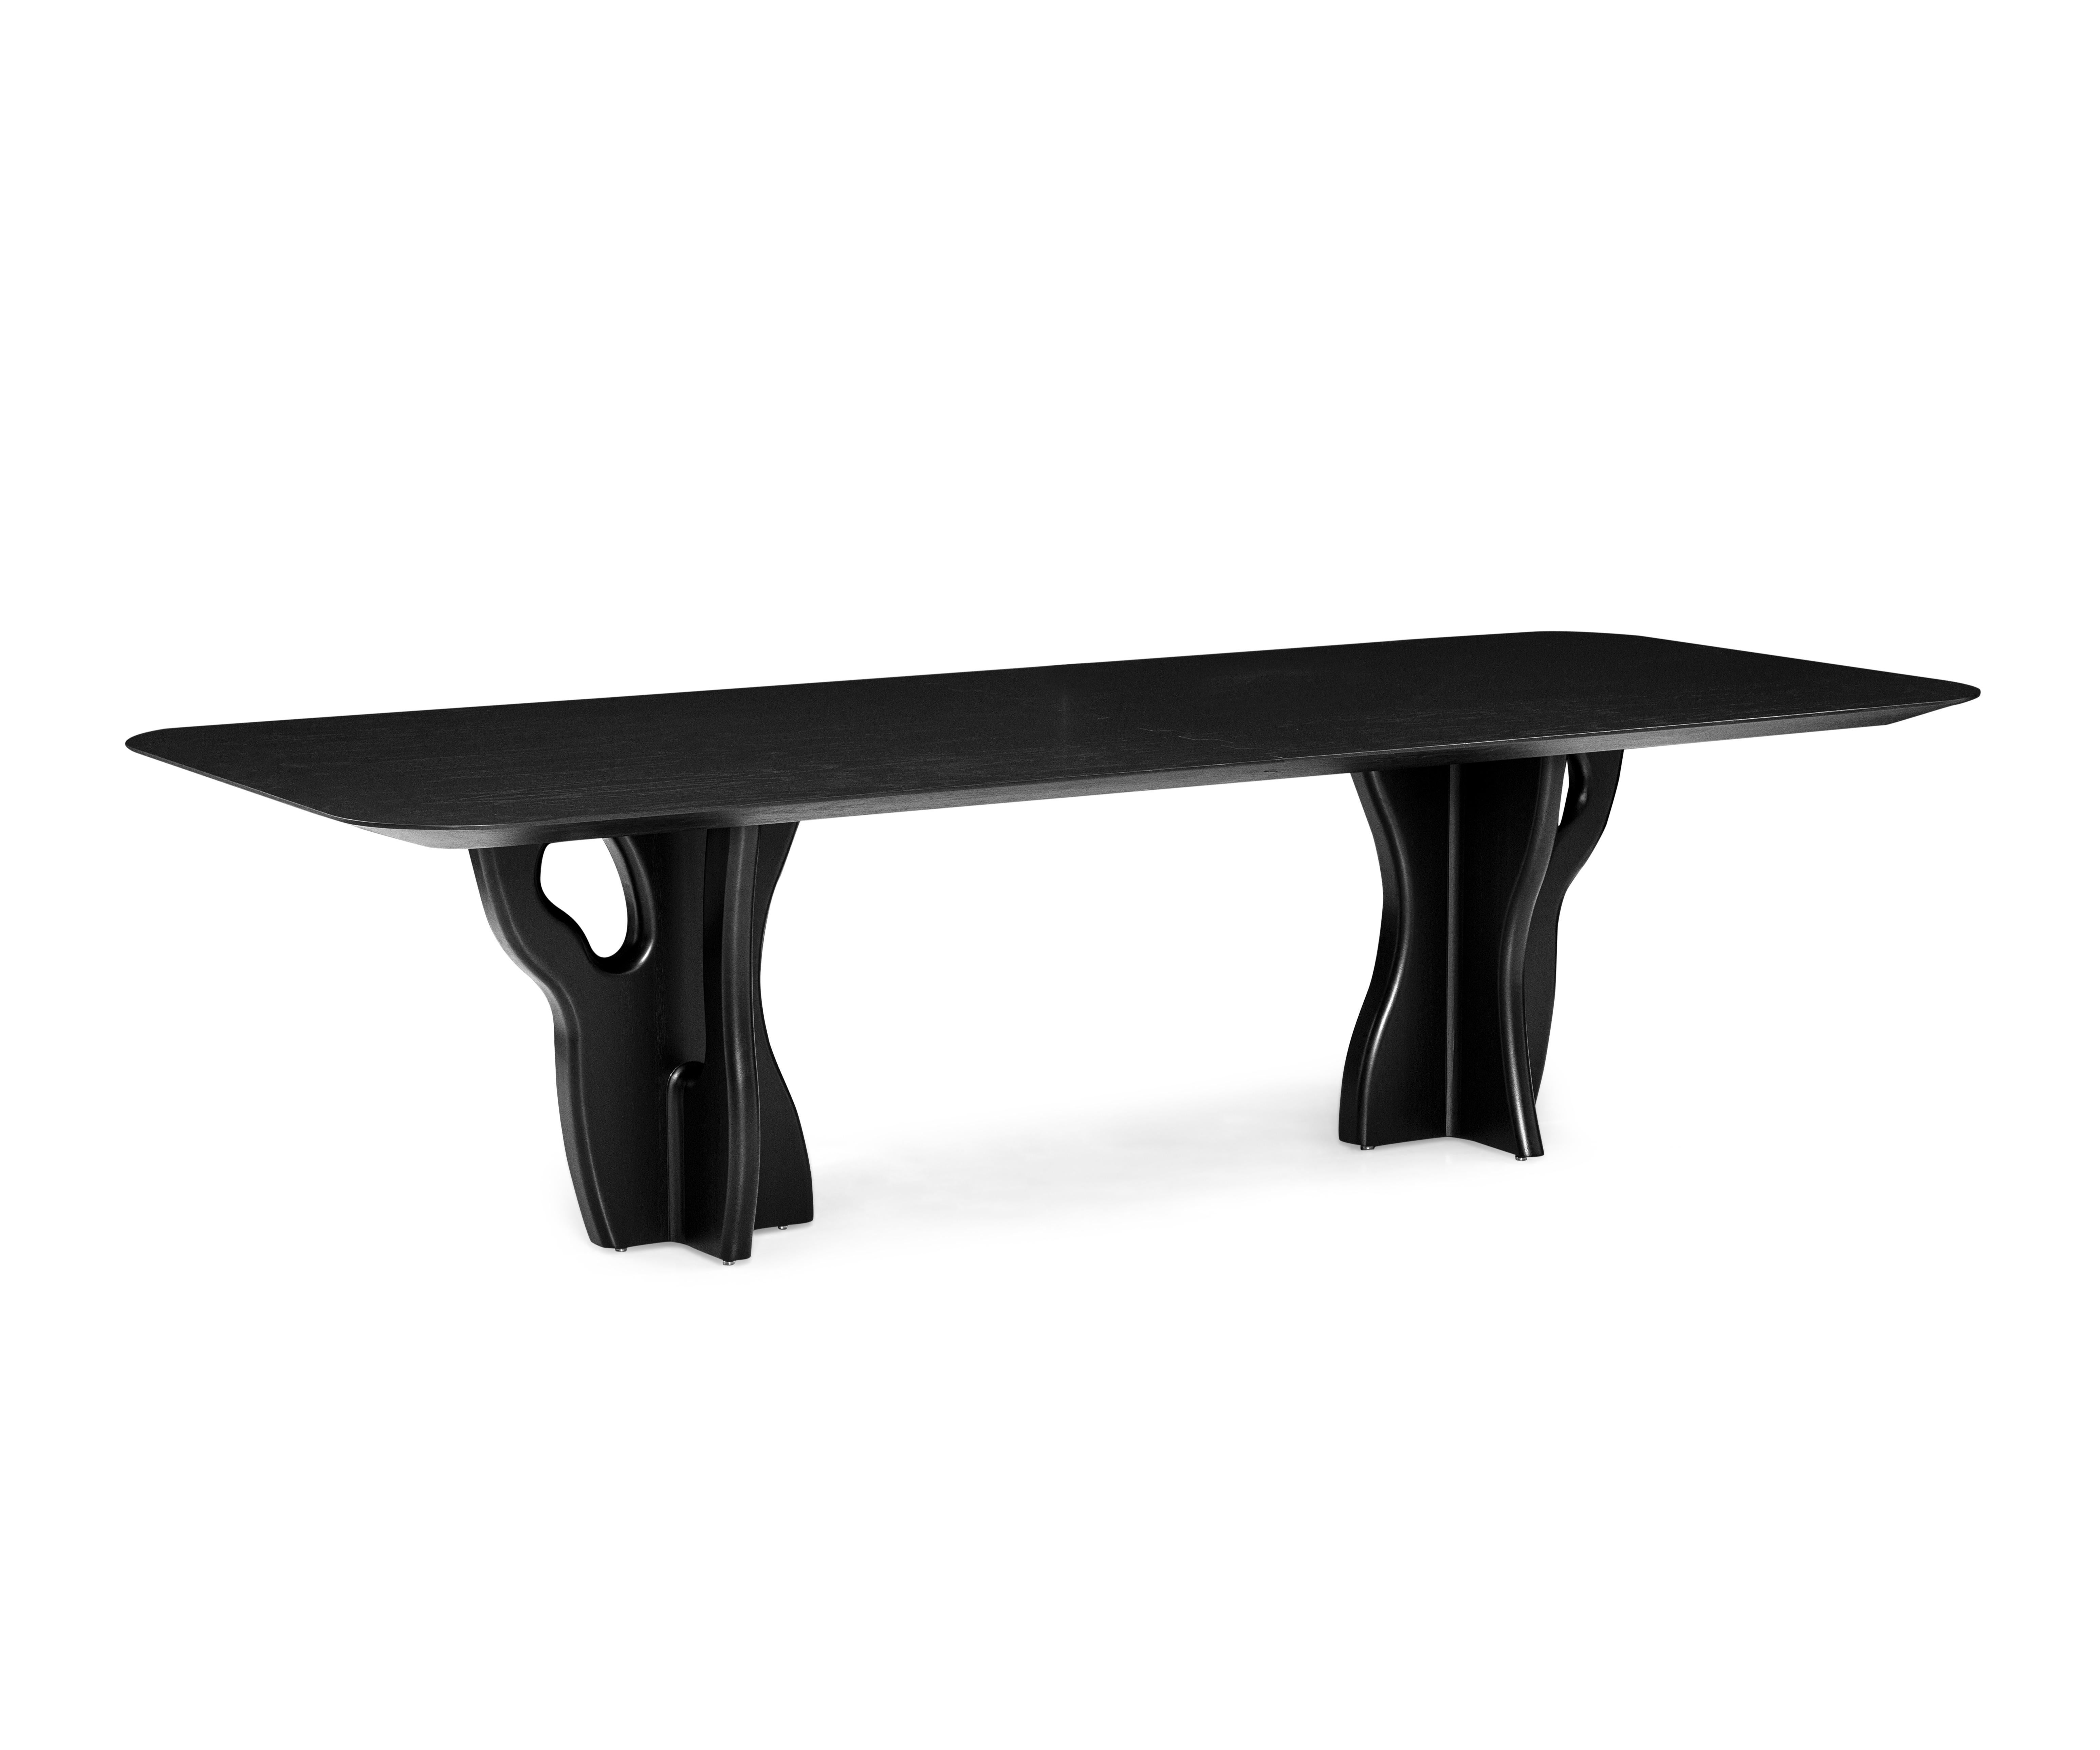 Uultis design team has manufactured the Suma dining table in a black oak finish top with organic solid wood legs, perfect for your dreamed dining space. This is a piece that is designed to be used during meals and gatherings, and it is also designed